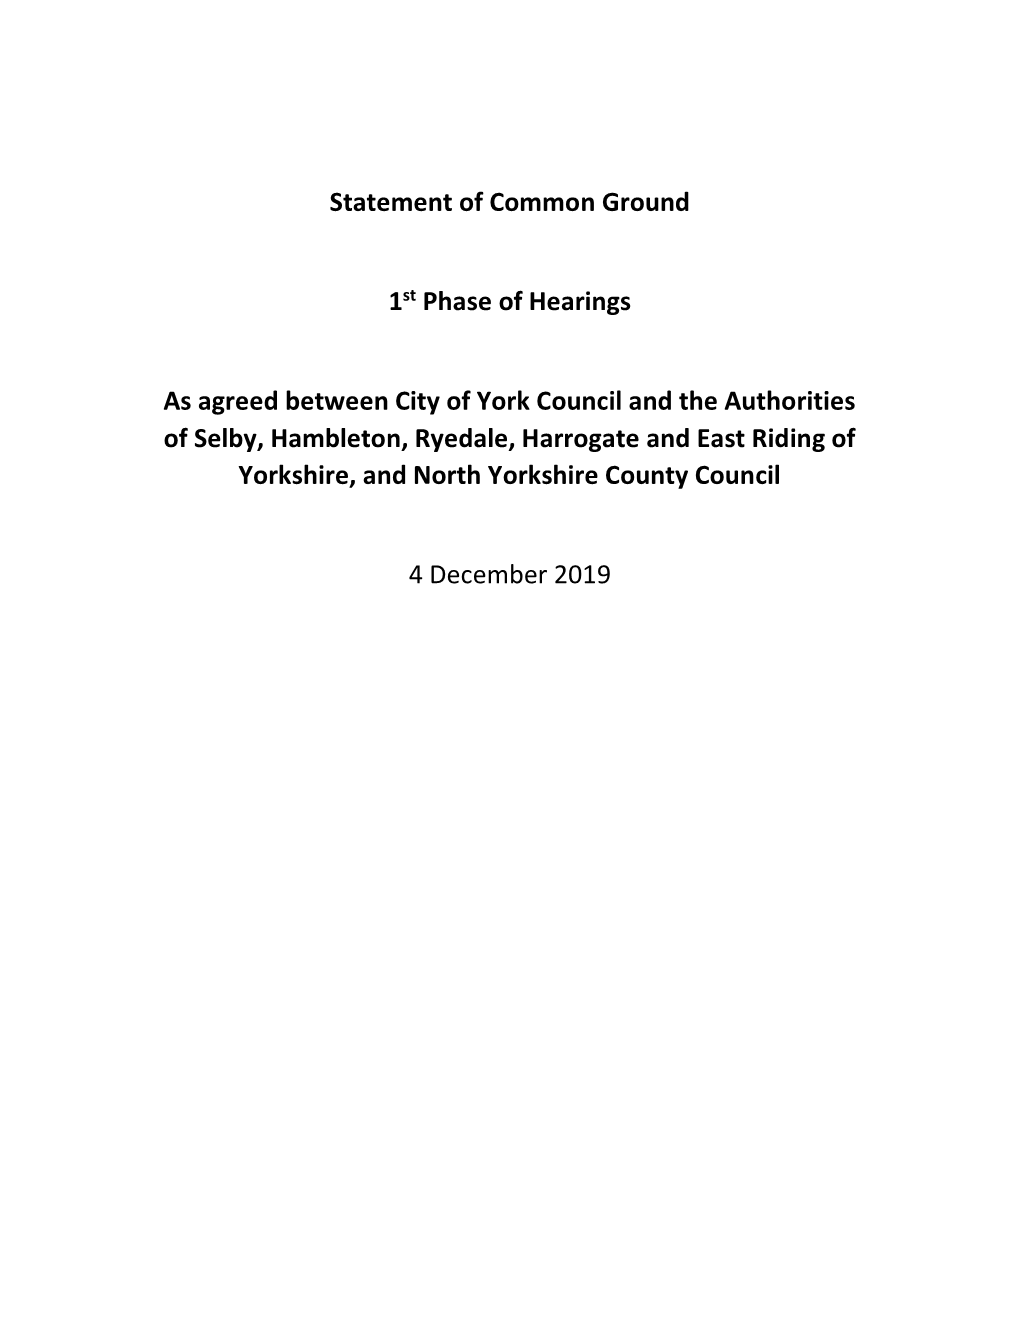 Statement of Common Ground 1St Phase Of